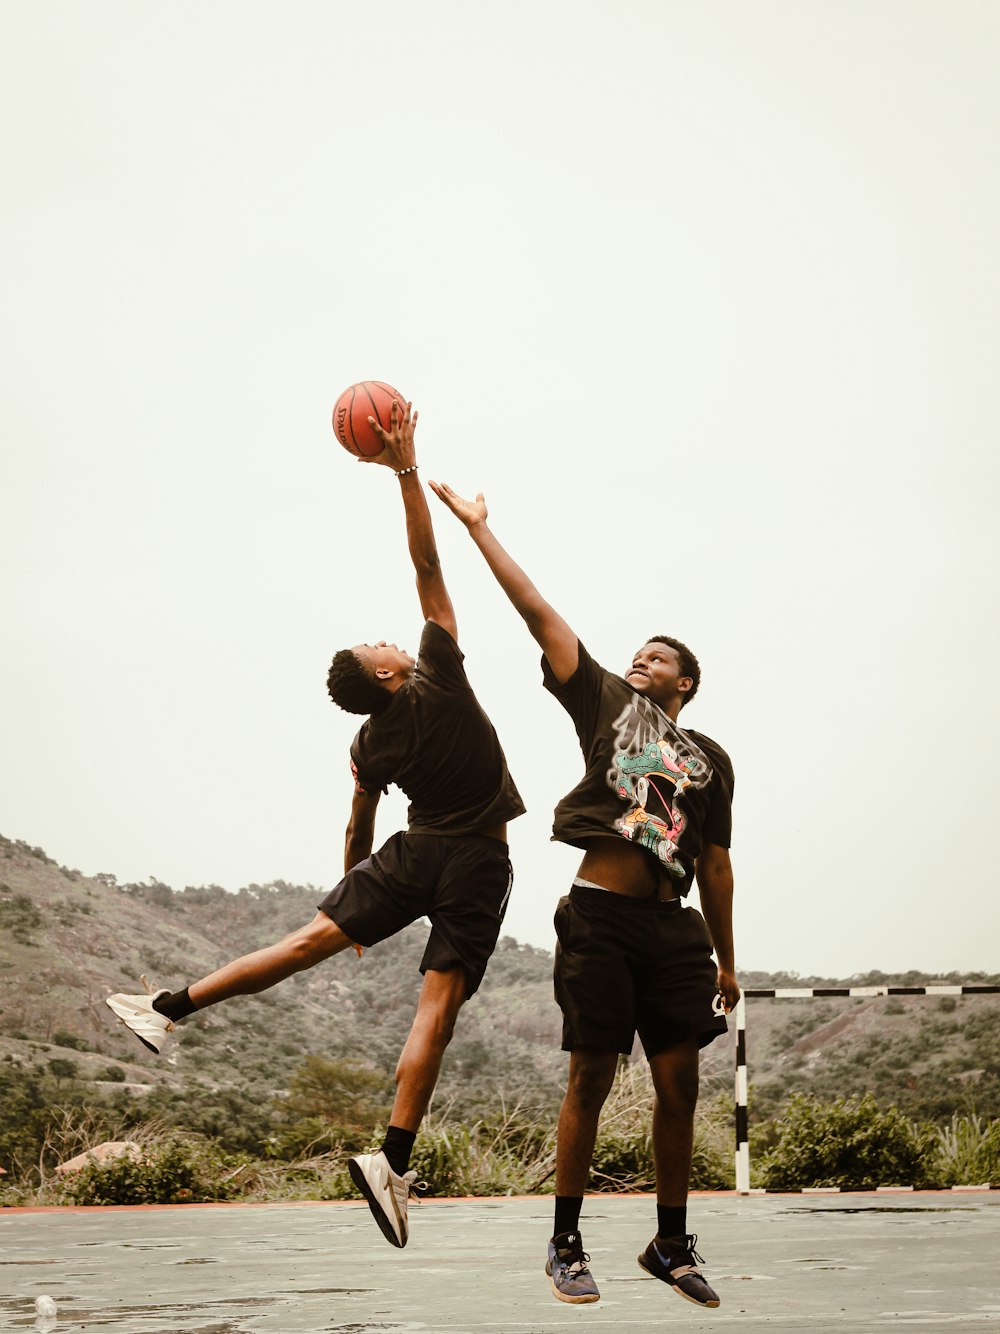 two young men playing basketball in a parking lot